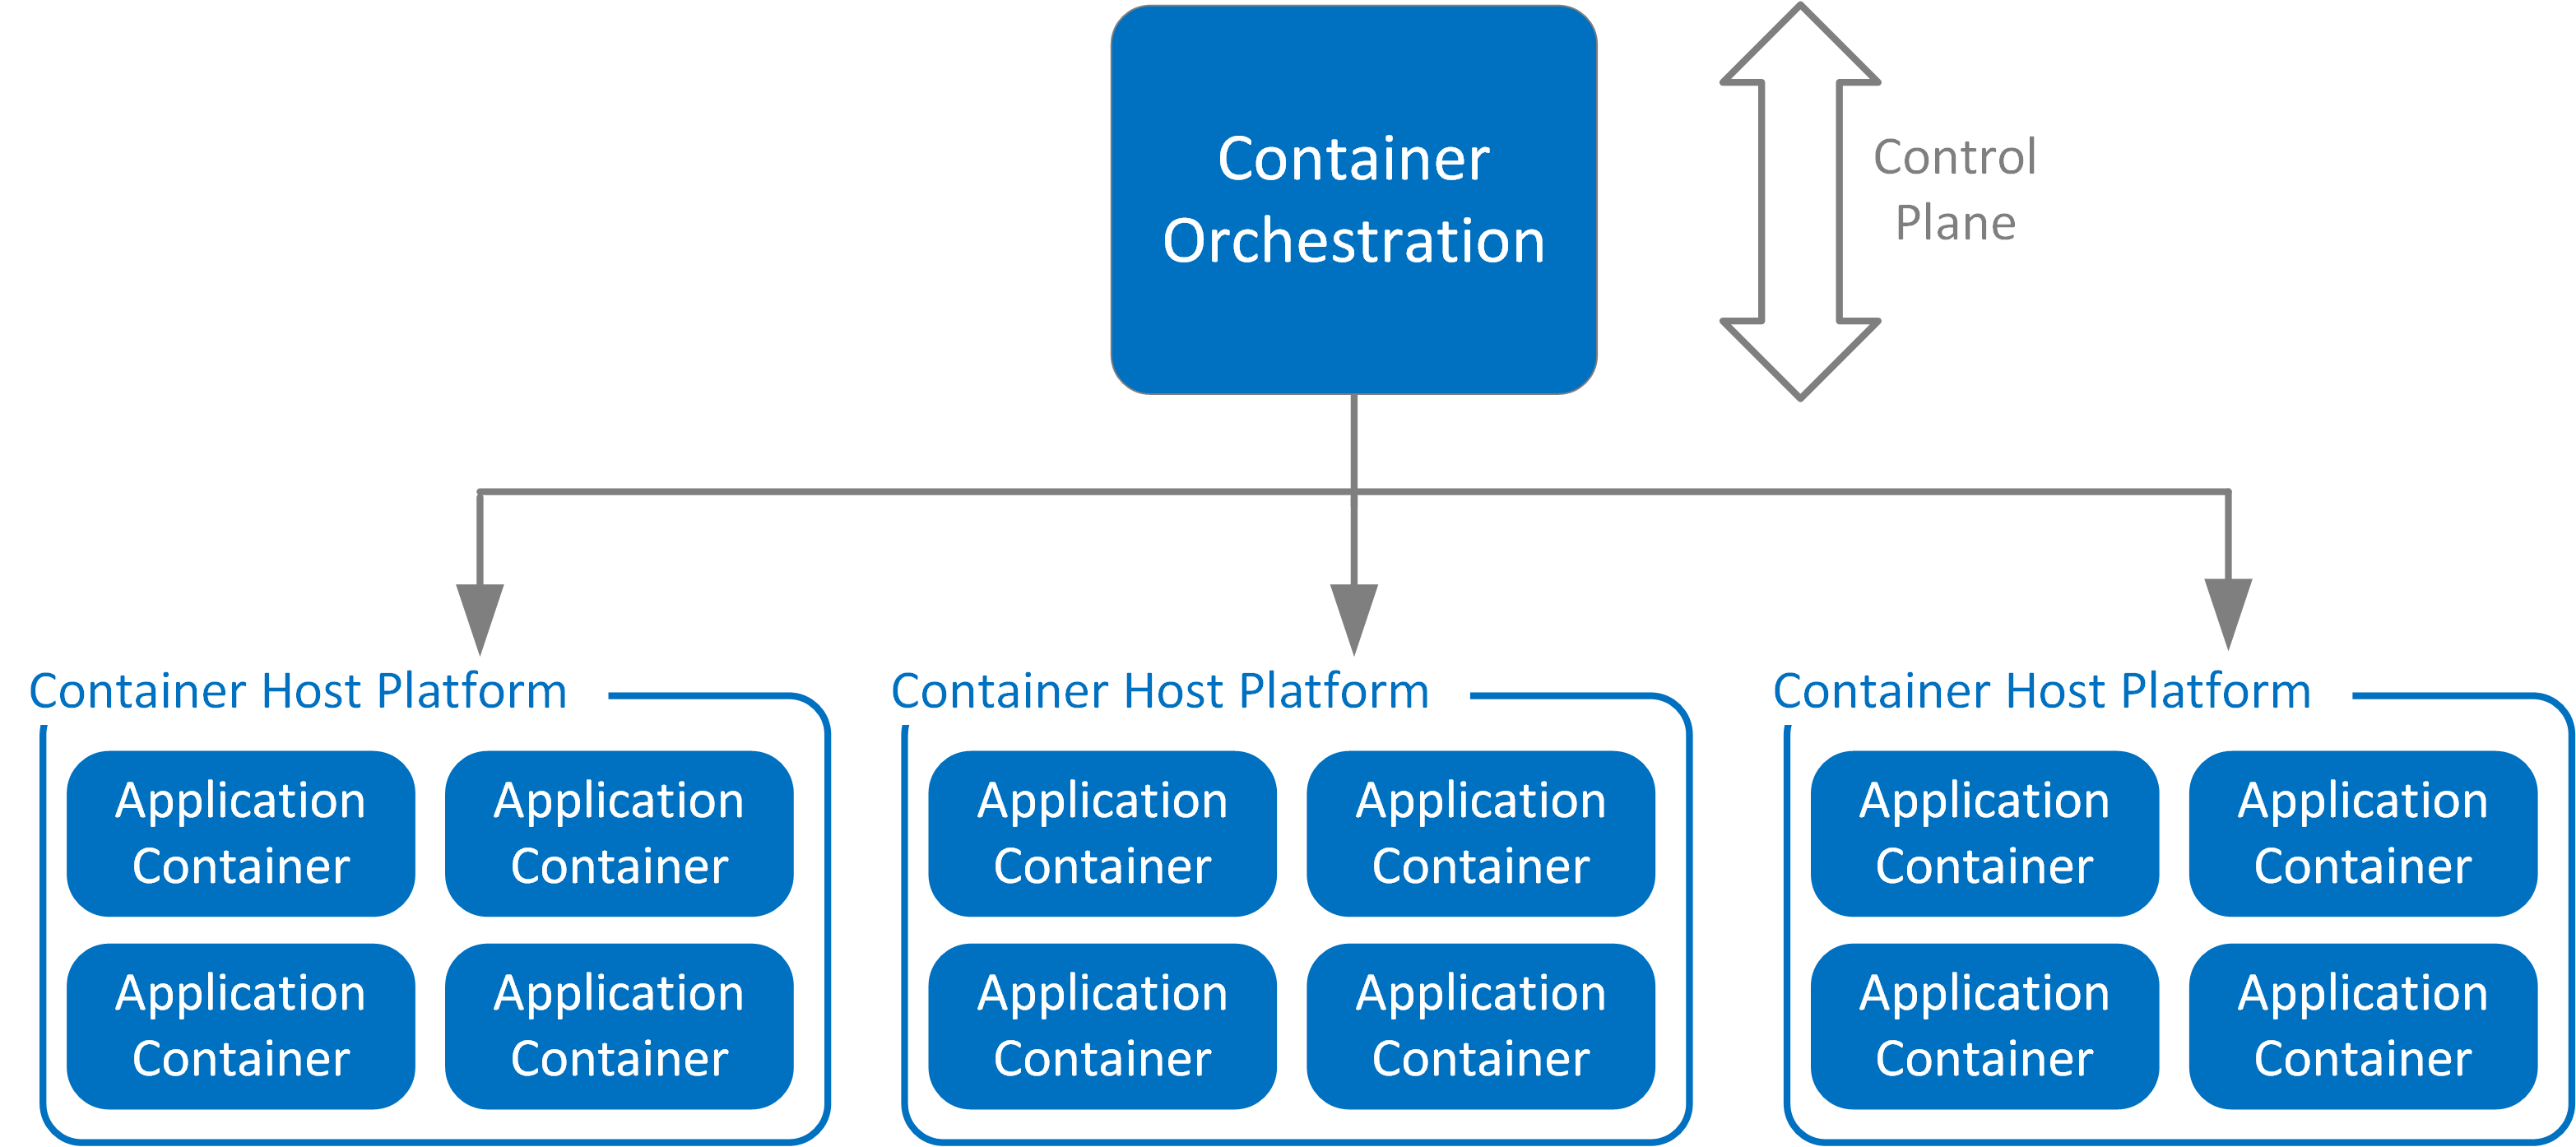 Orchestration groups - Configuration Manager